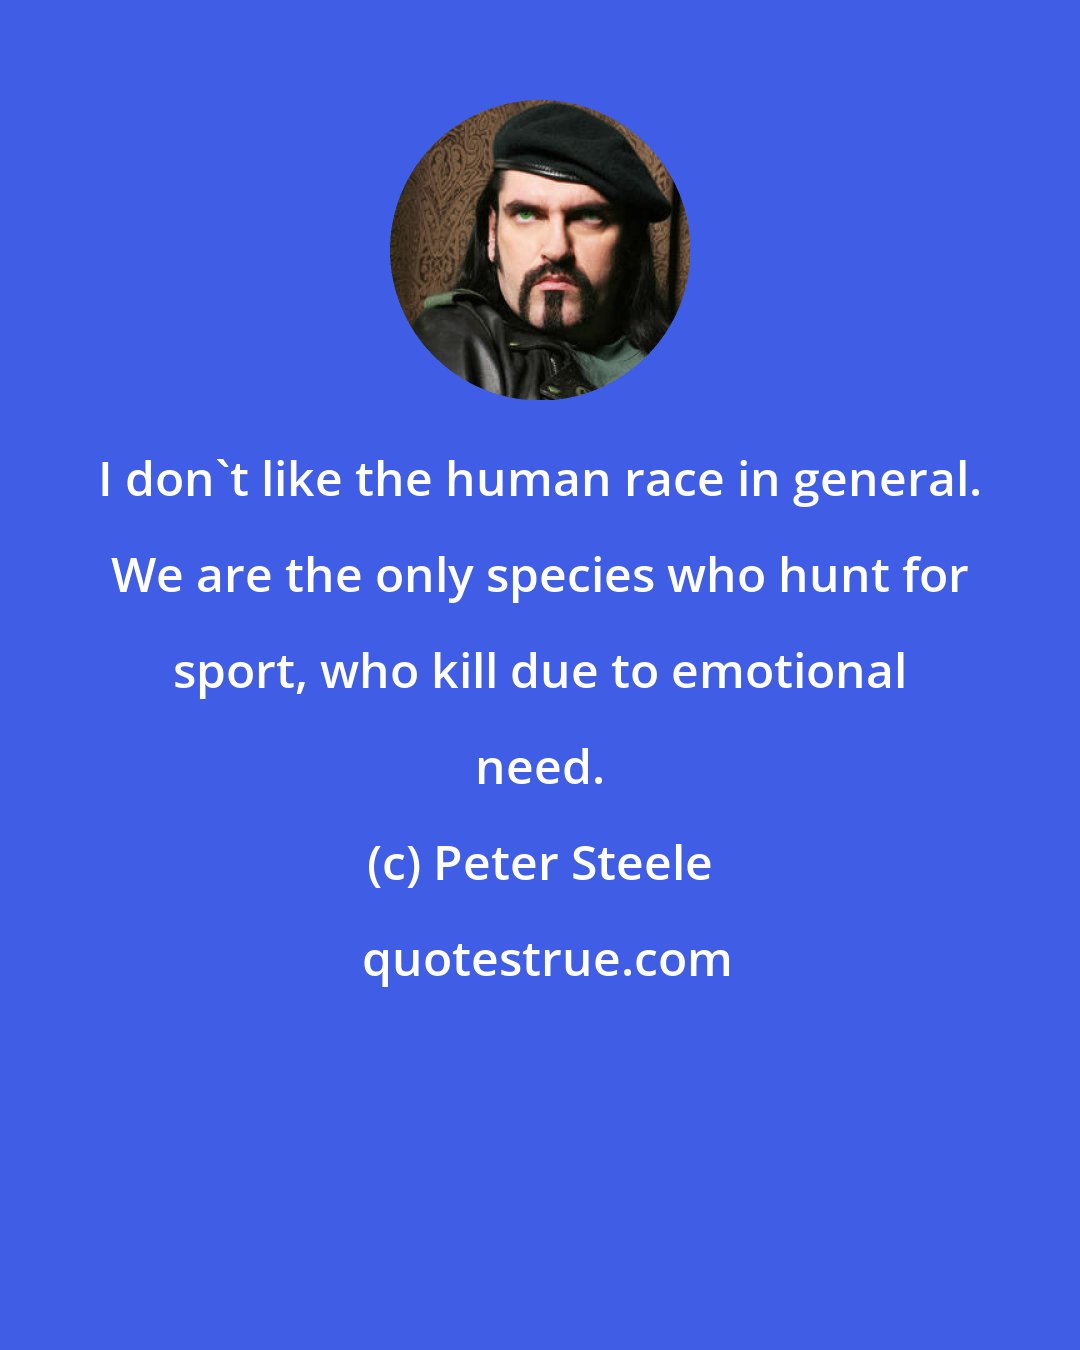 Peter Steele: I don't like the human race in general. We are the only species who hunt for sport, who kill due to emotional need.